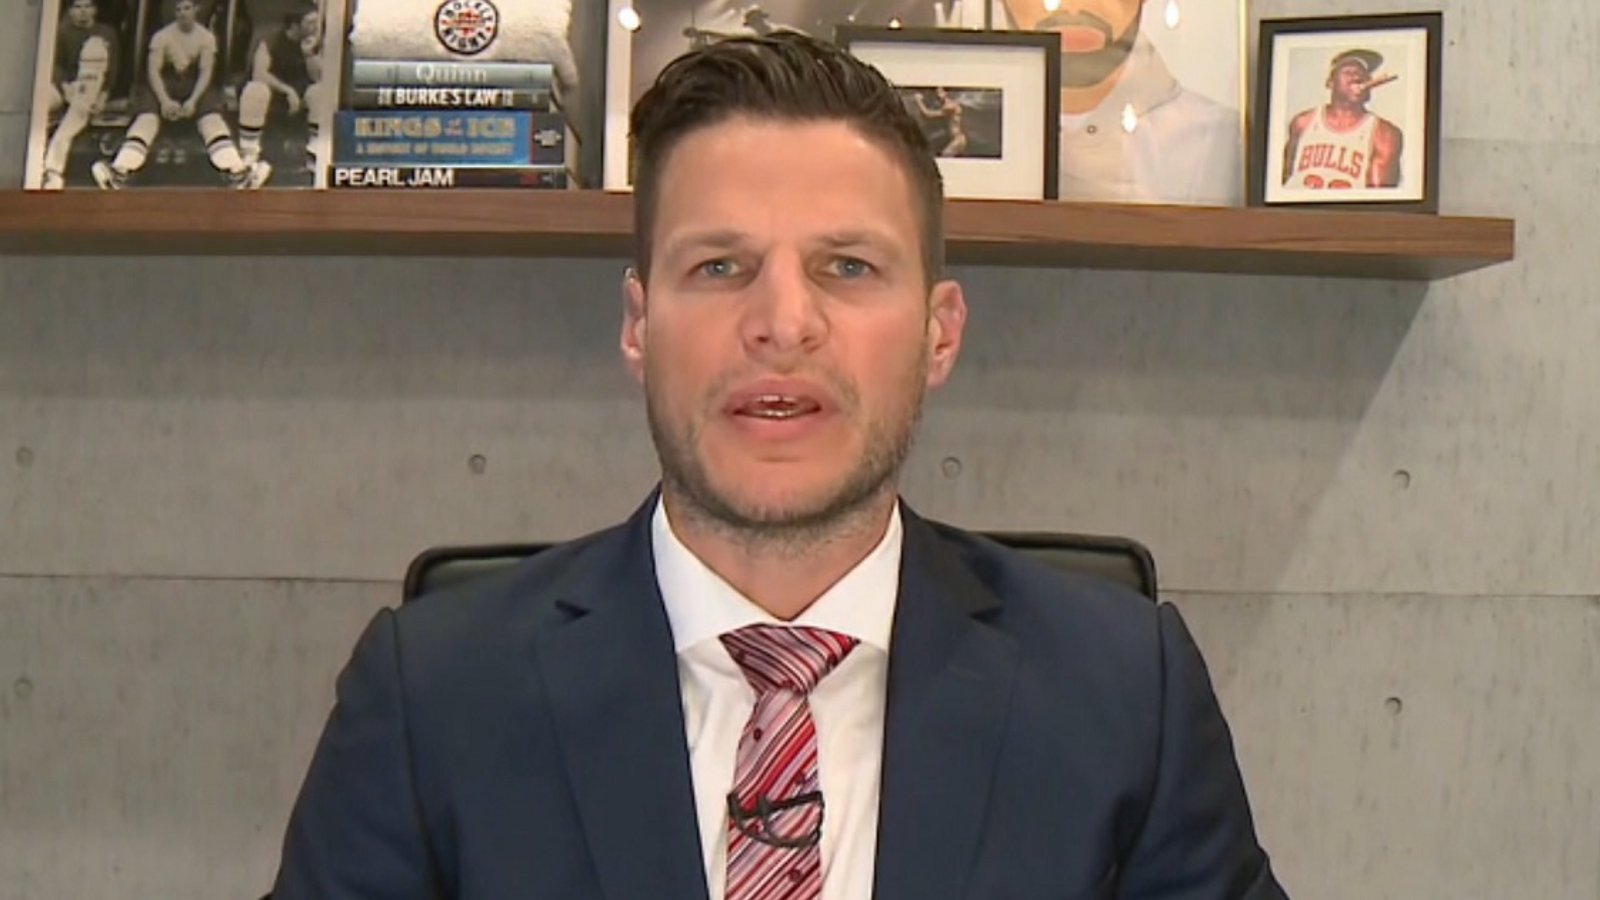 Kevin Bieksa steps up his game with 3 hilarious photos on HNIC.